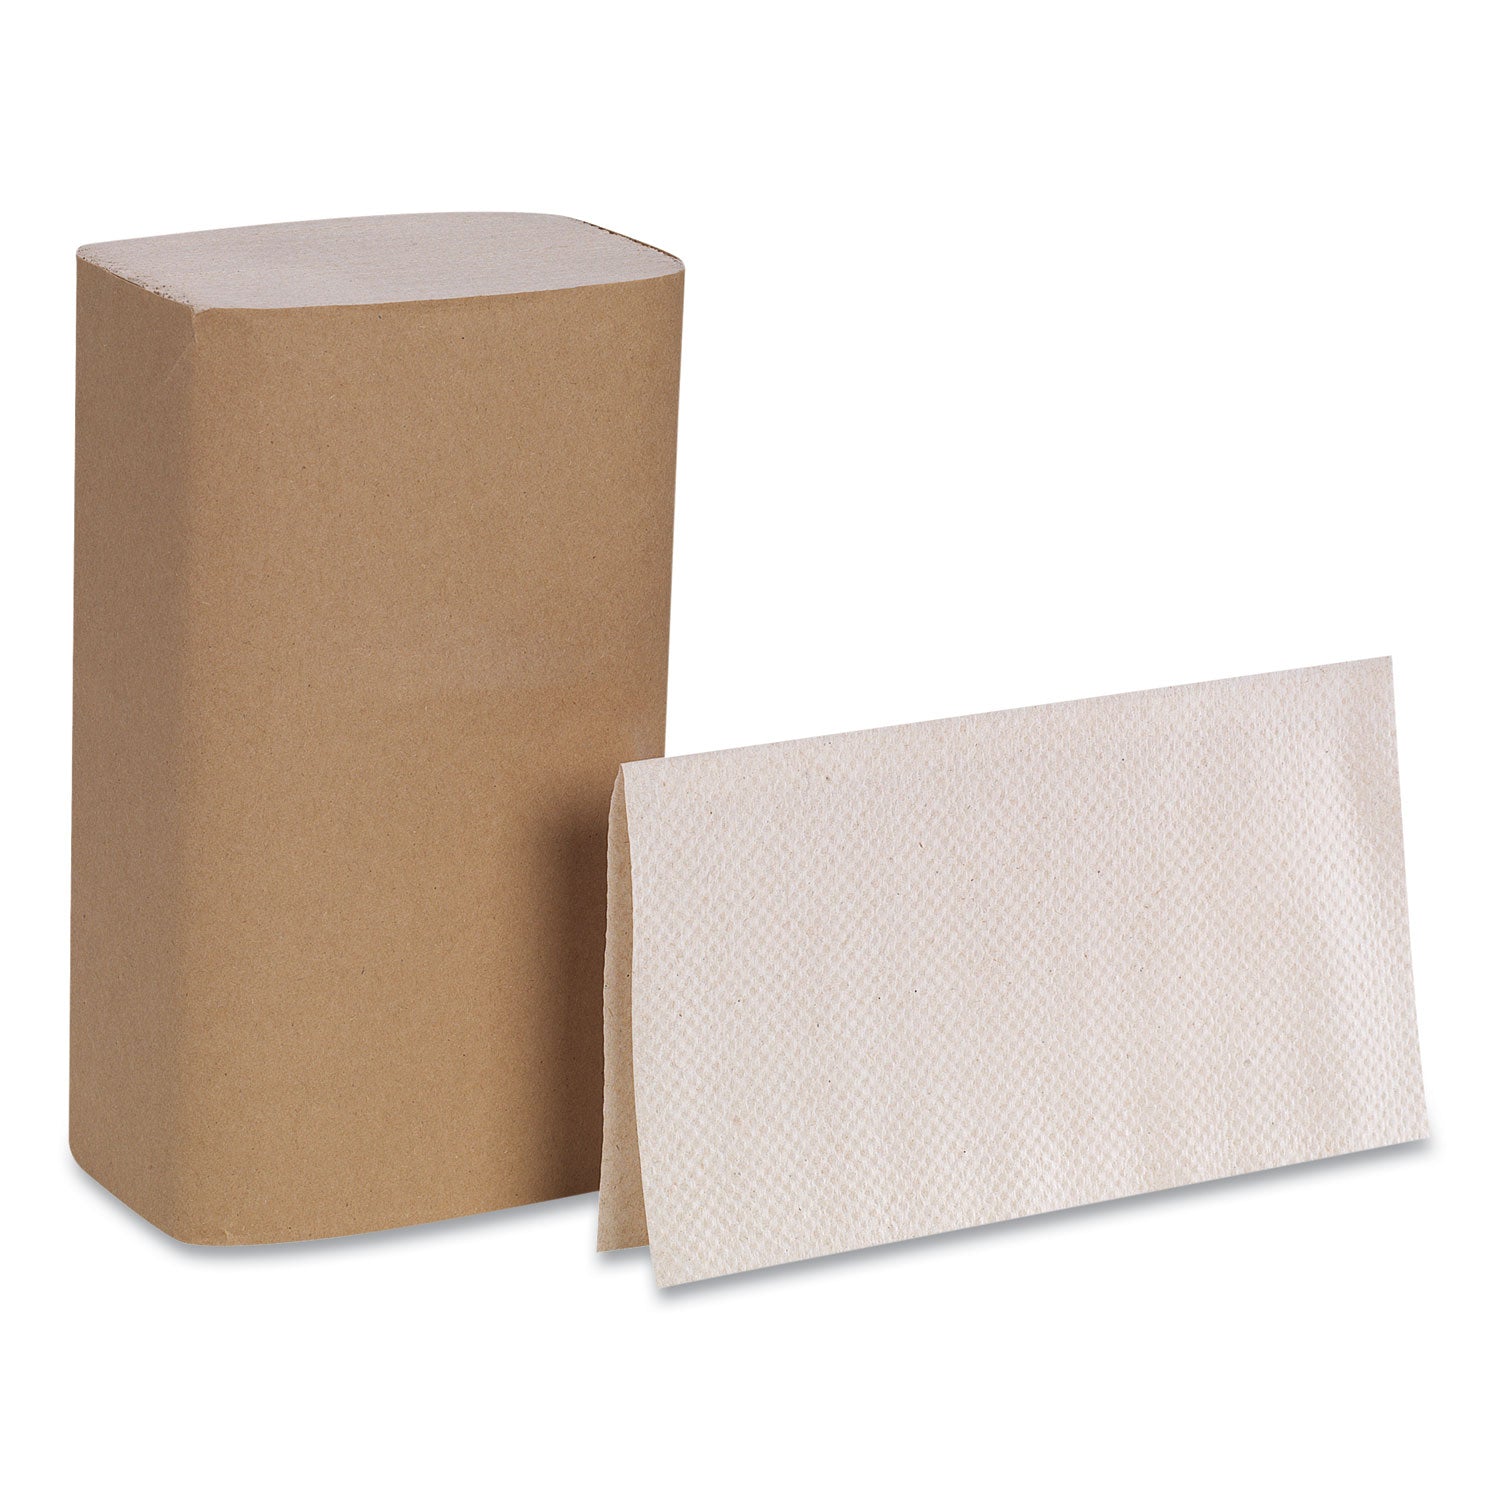 Pacific Blue Basic S-Fold Paper Towels, 1-Ply, 10.25 x 9.25, Brown, 250/Pack, 16 Packs/Carton - 